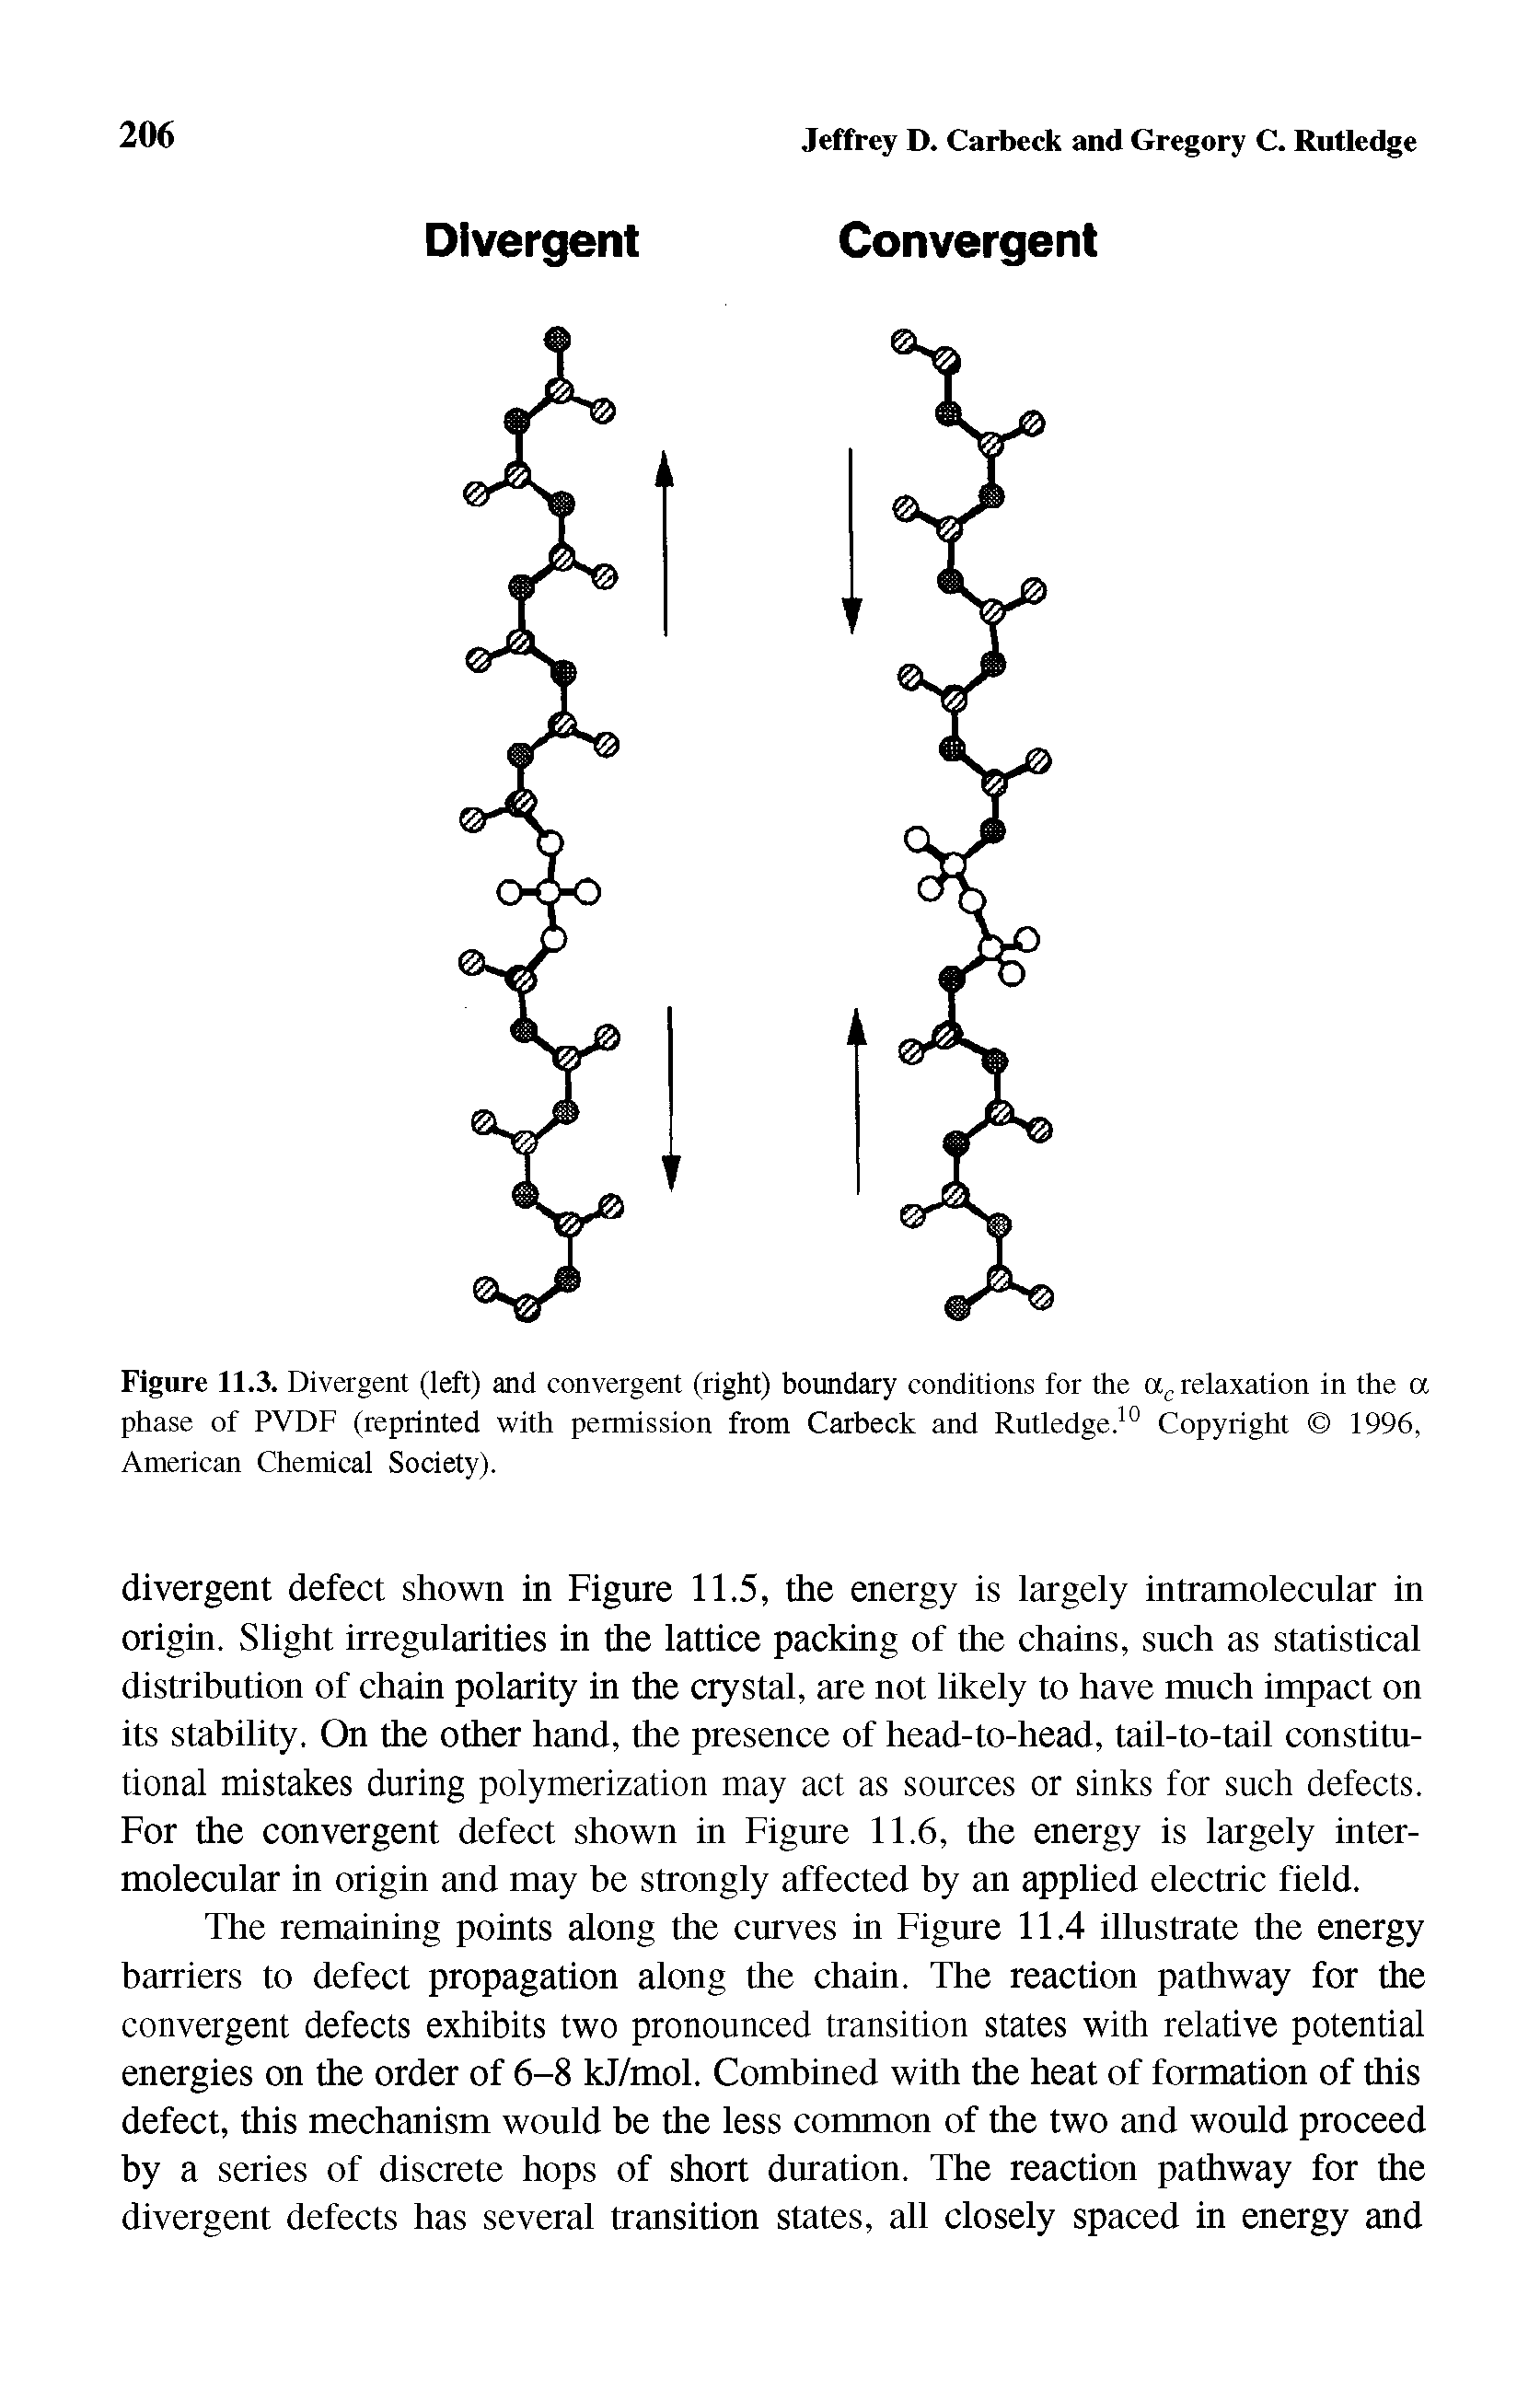 Figure 11.3. Divergent (left) and convergent (right) boundary conditions for the relaxation in the a phase of PVDF (reprinted with permission from Carbeck and Rutledge. Copyright 1996, American Chemical Society).